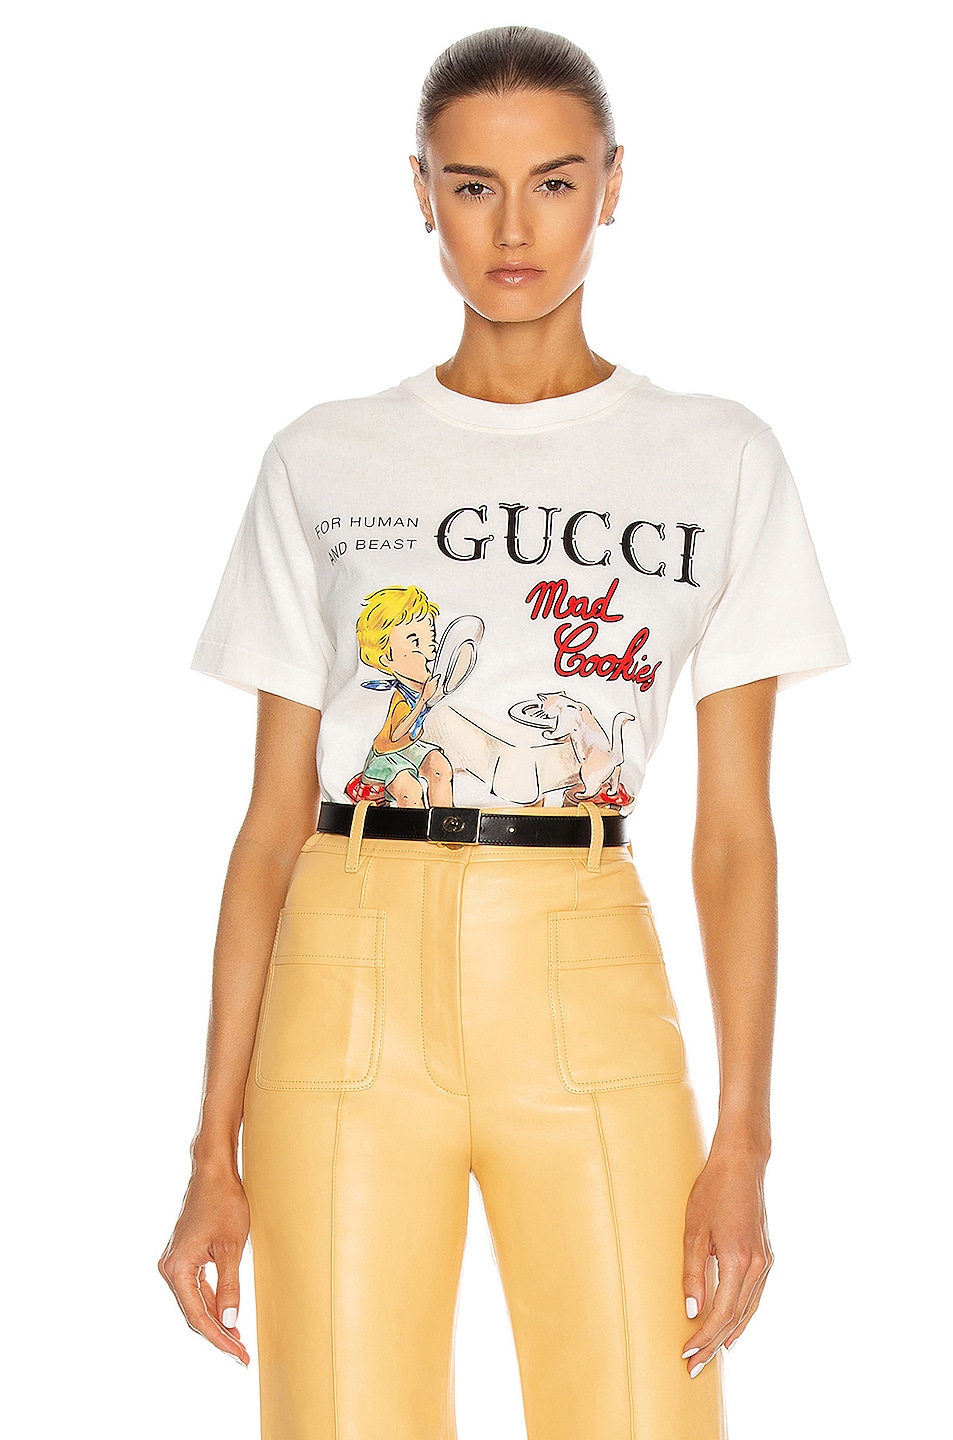 Image 1 of Gucci Mad Cookies T Shirt in Sunlight